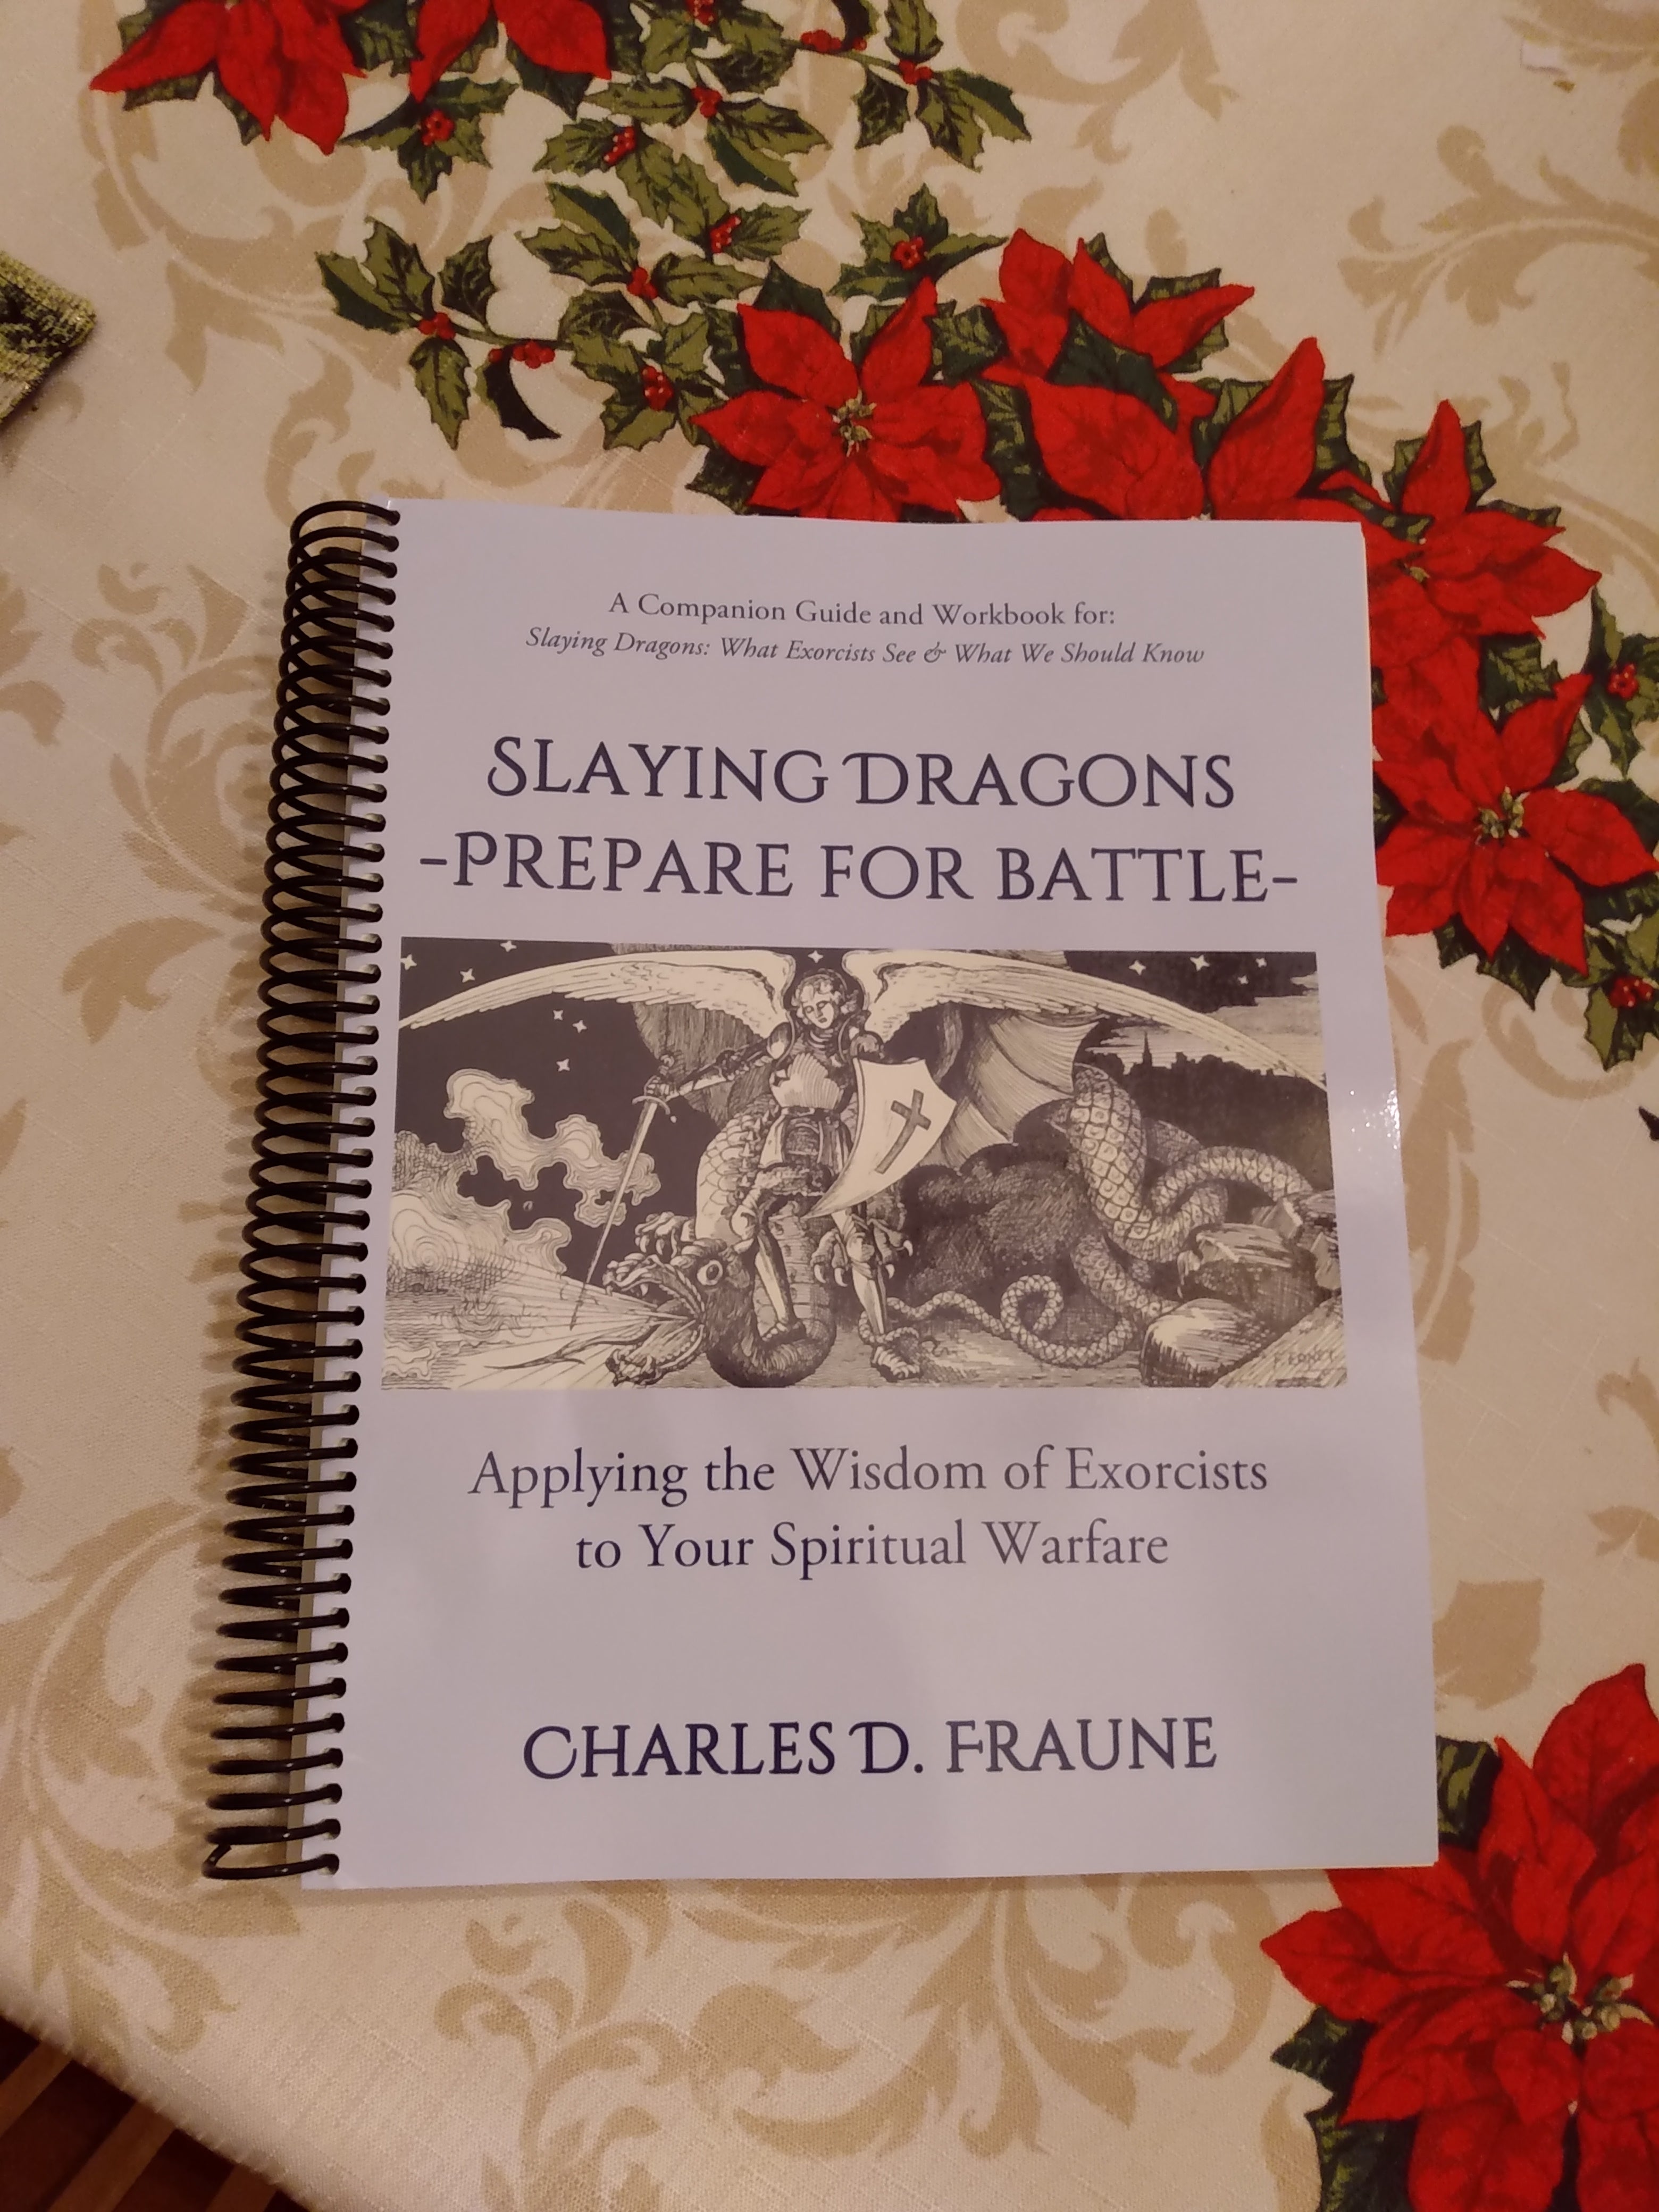 STUDY GUIDE! "Slaying Dragons - Prepare for Battle:  Applying the Wisdom of Exorcists to Your Spiritual Warfare"